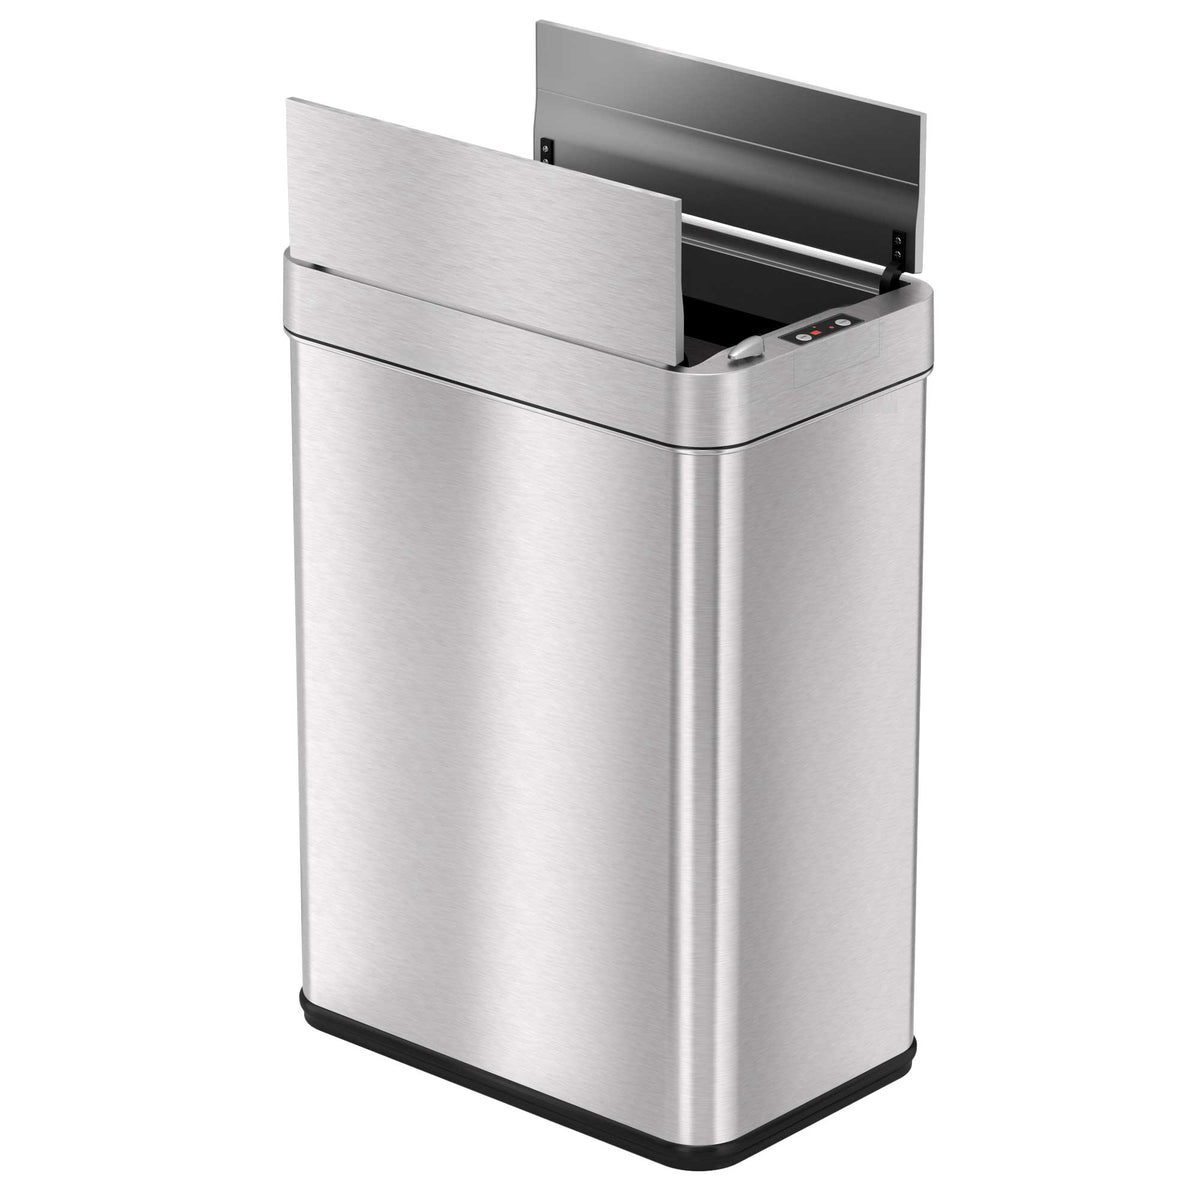 iTouchless 13-Gallon Extra Wide Stainless Steel Automatic Sensor Touchless Trash  Can